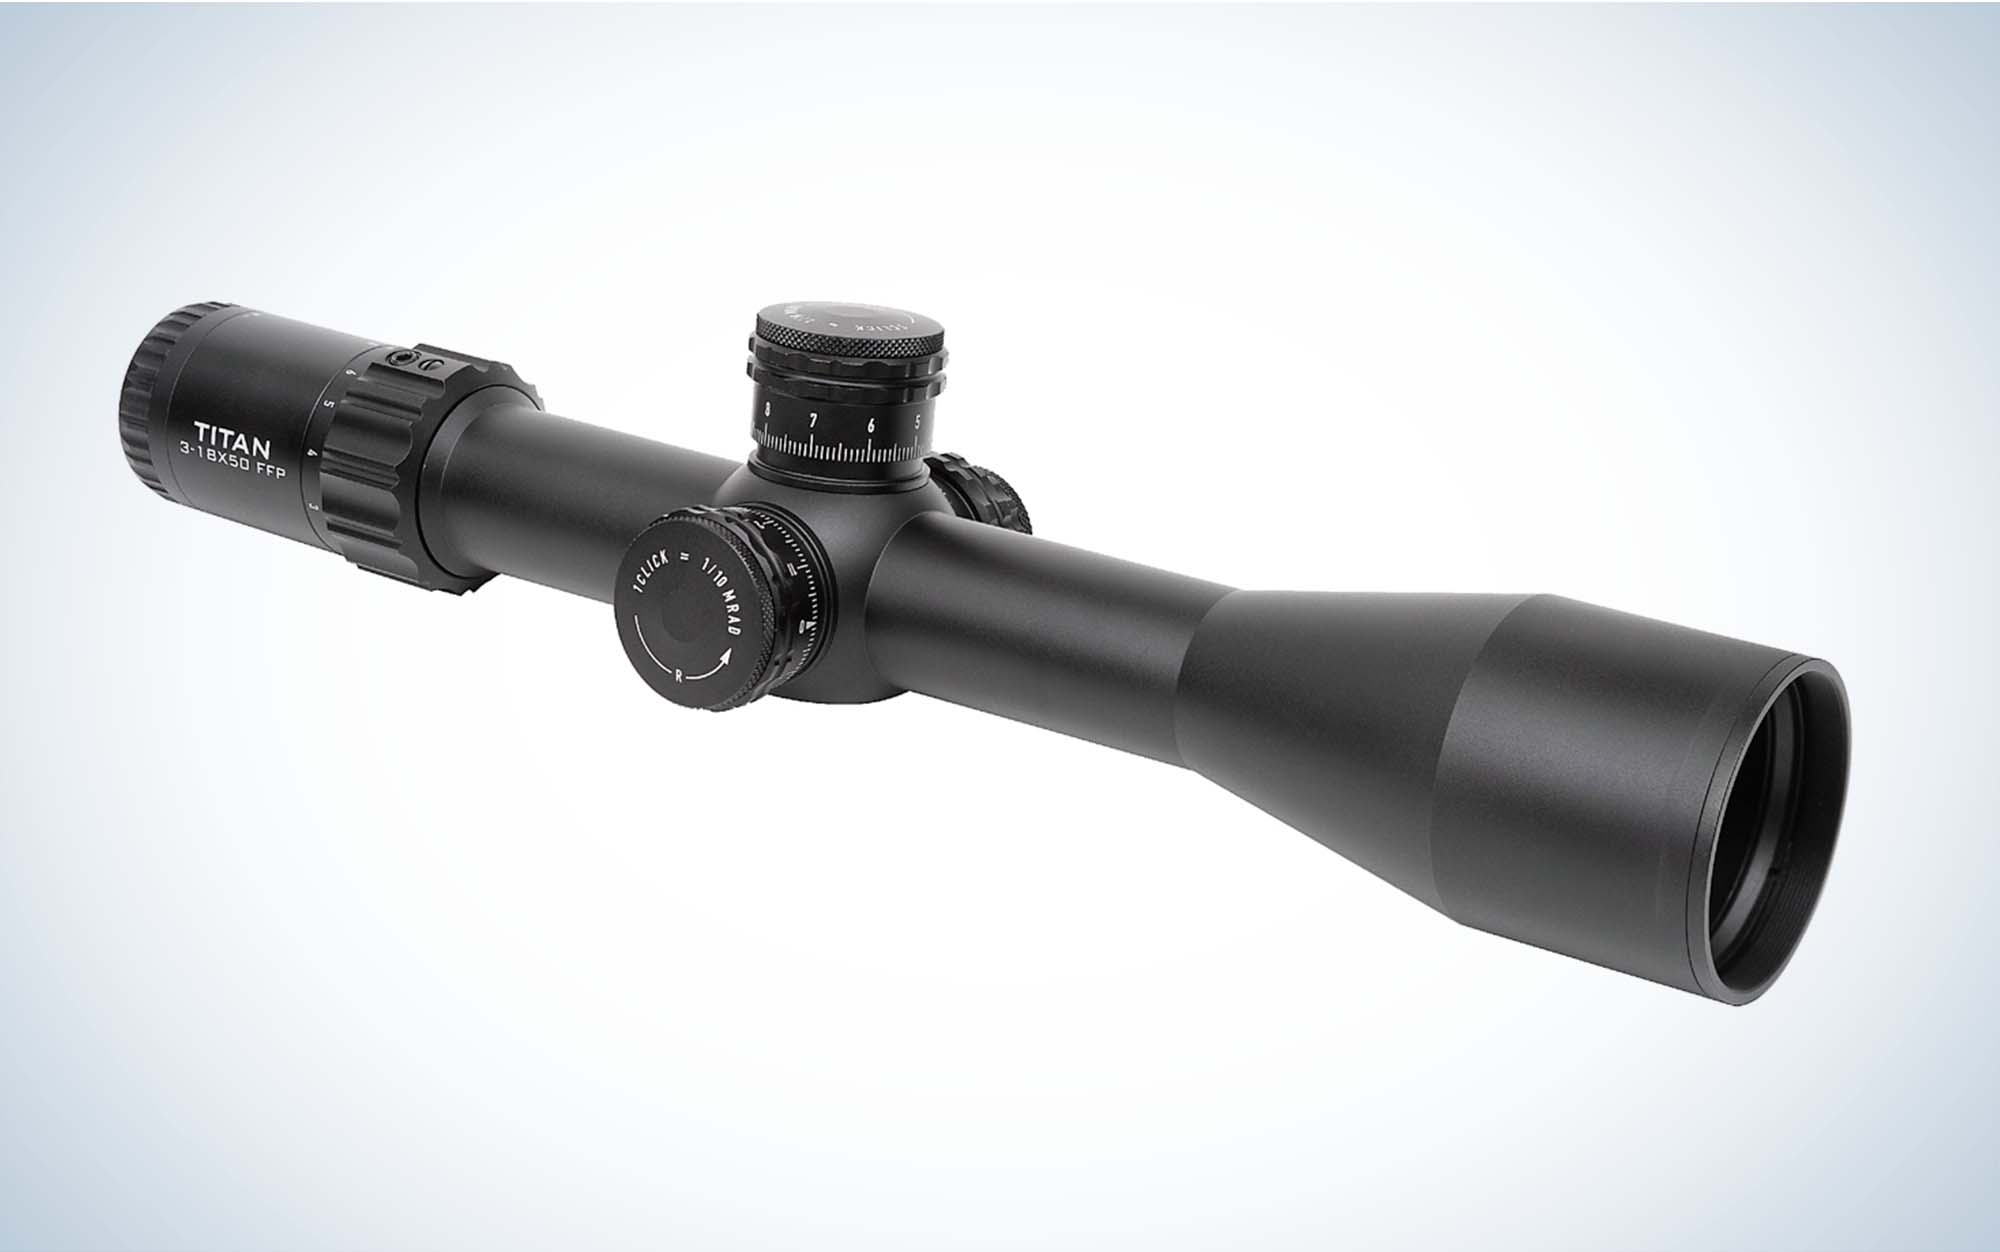 The Titan is one of the best air rifle scopes